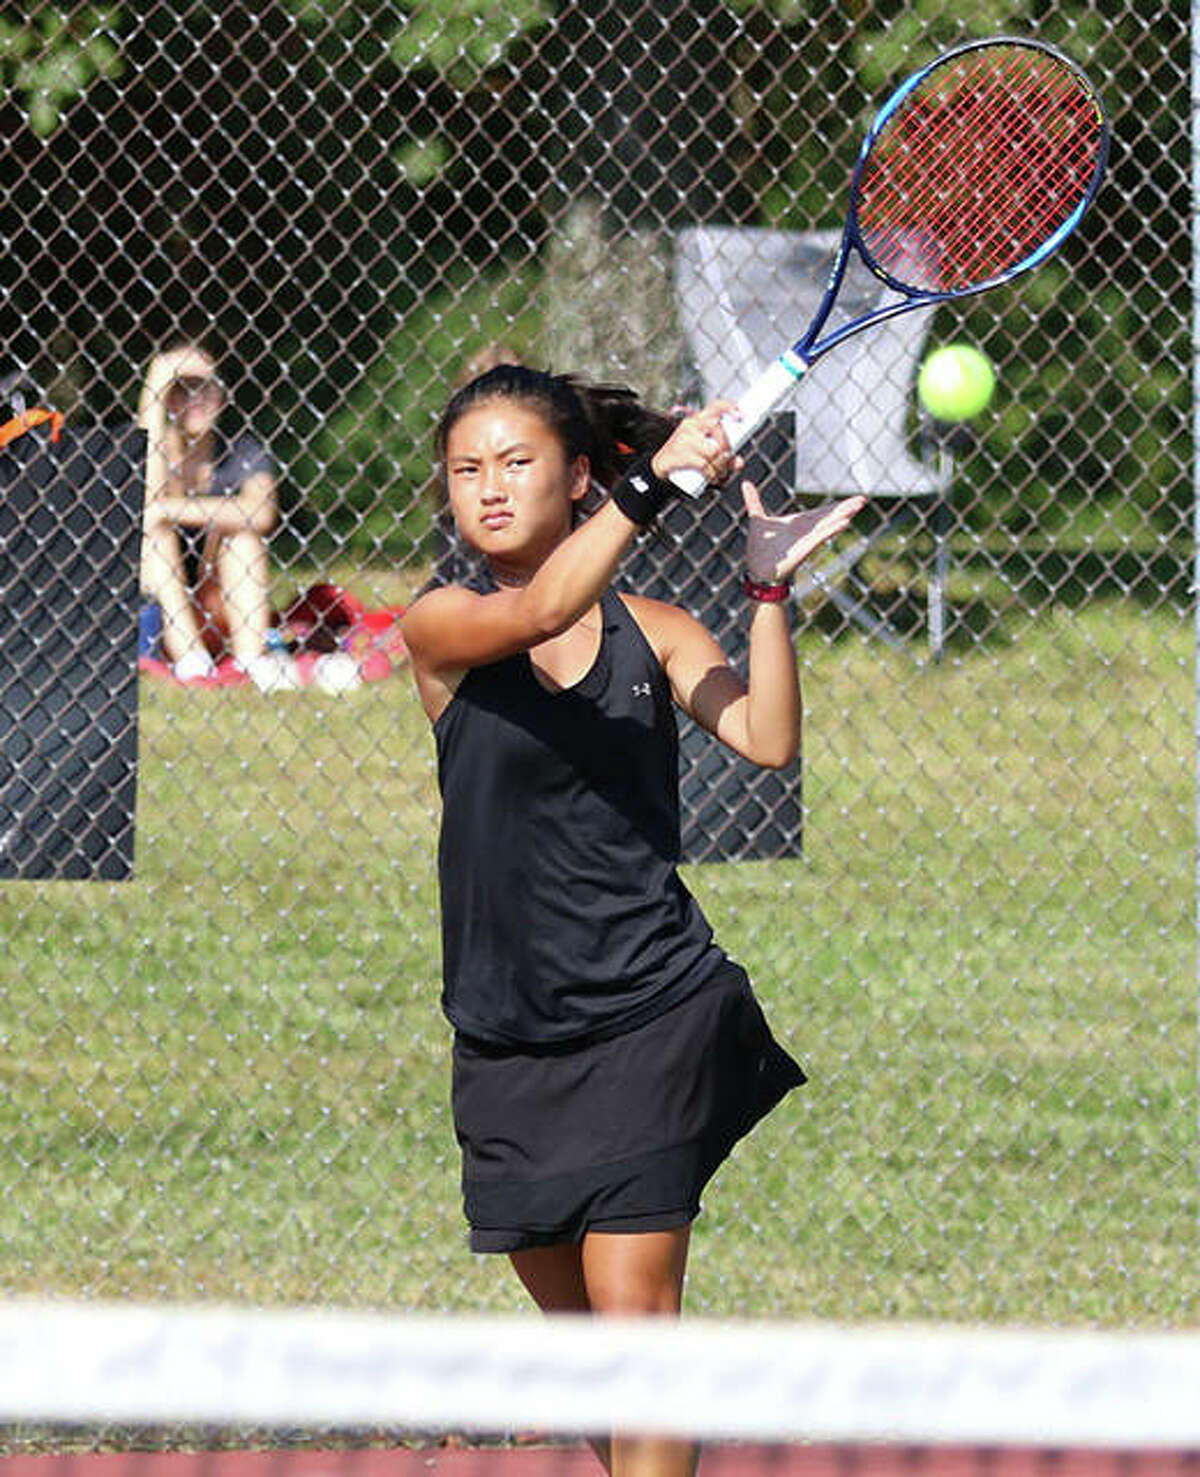 Edwardsville’s Chloe Koons hits a shot a match last season at Edwardsville. Koons finished the season as a SWC and Class 2A sectional singles champion with a 34-0 record.